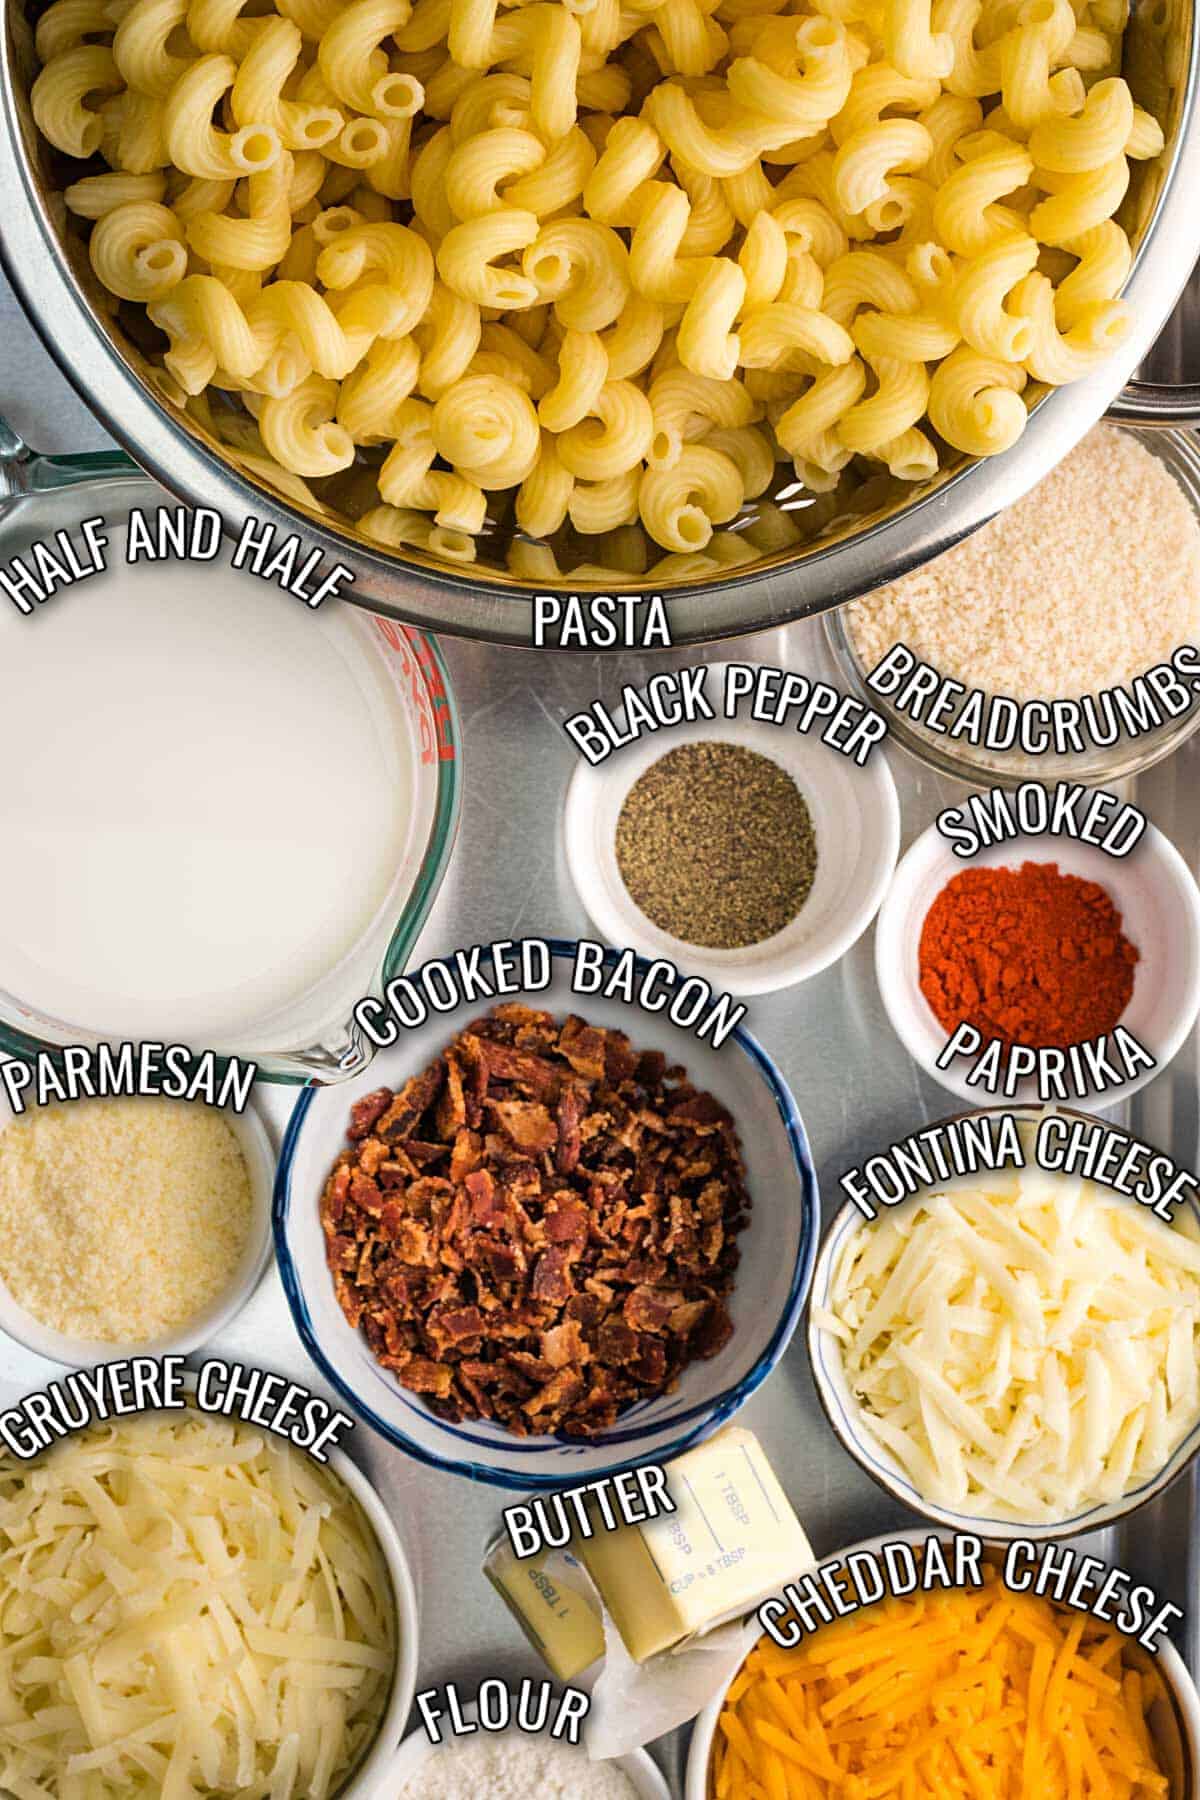 ingredients for longhorn steakhouse mac and cheese recipe.